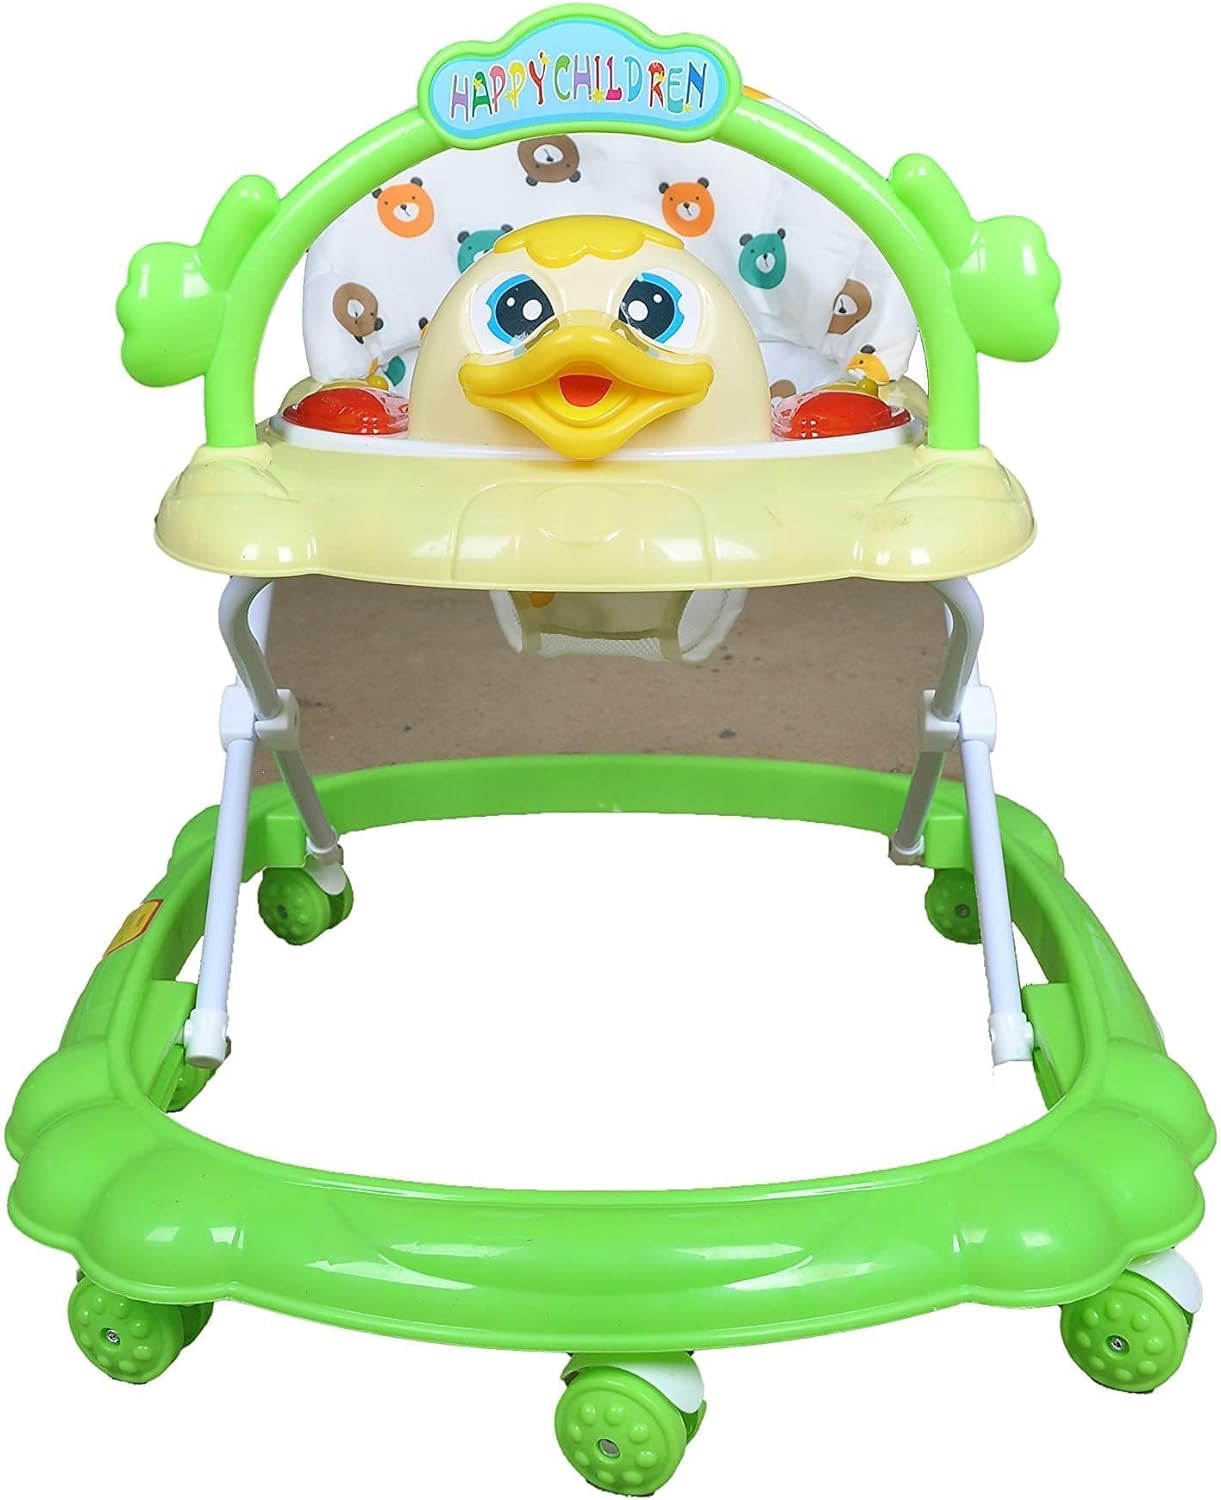 Baby walker with games and music levels